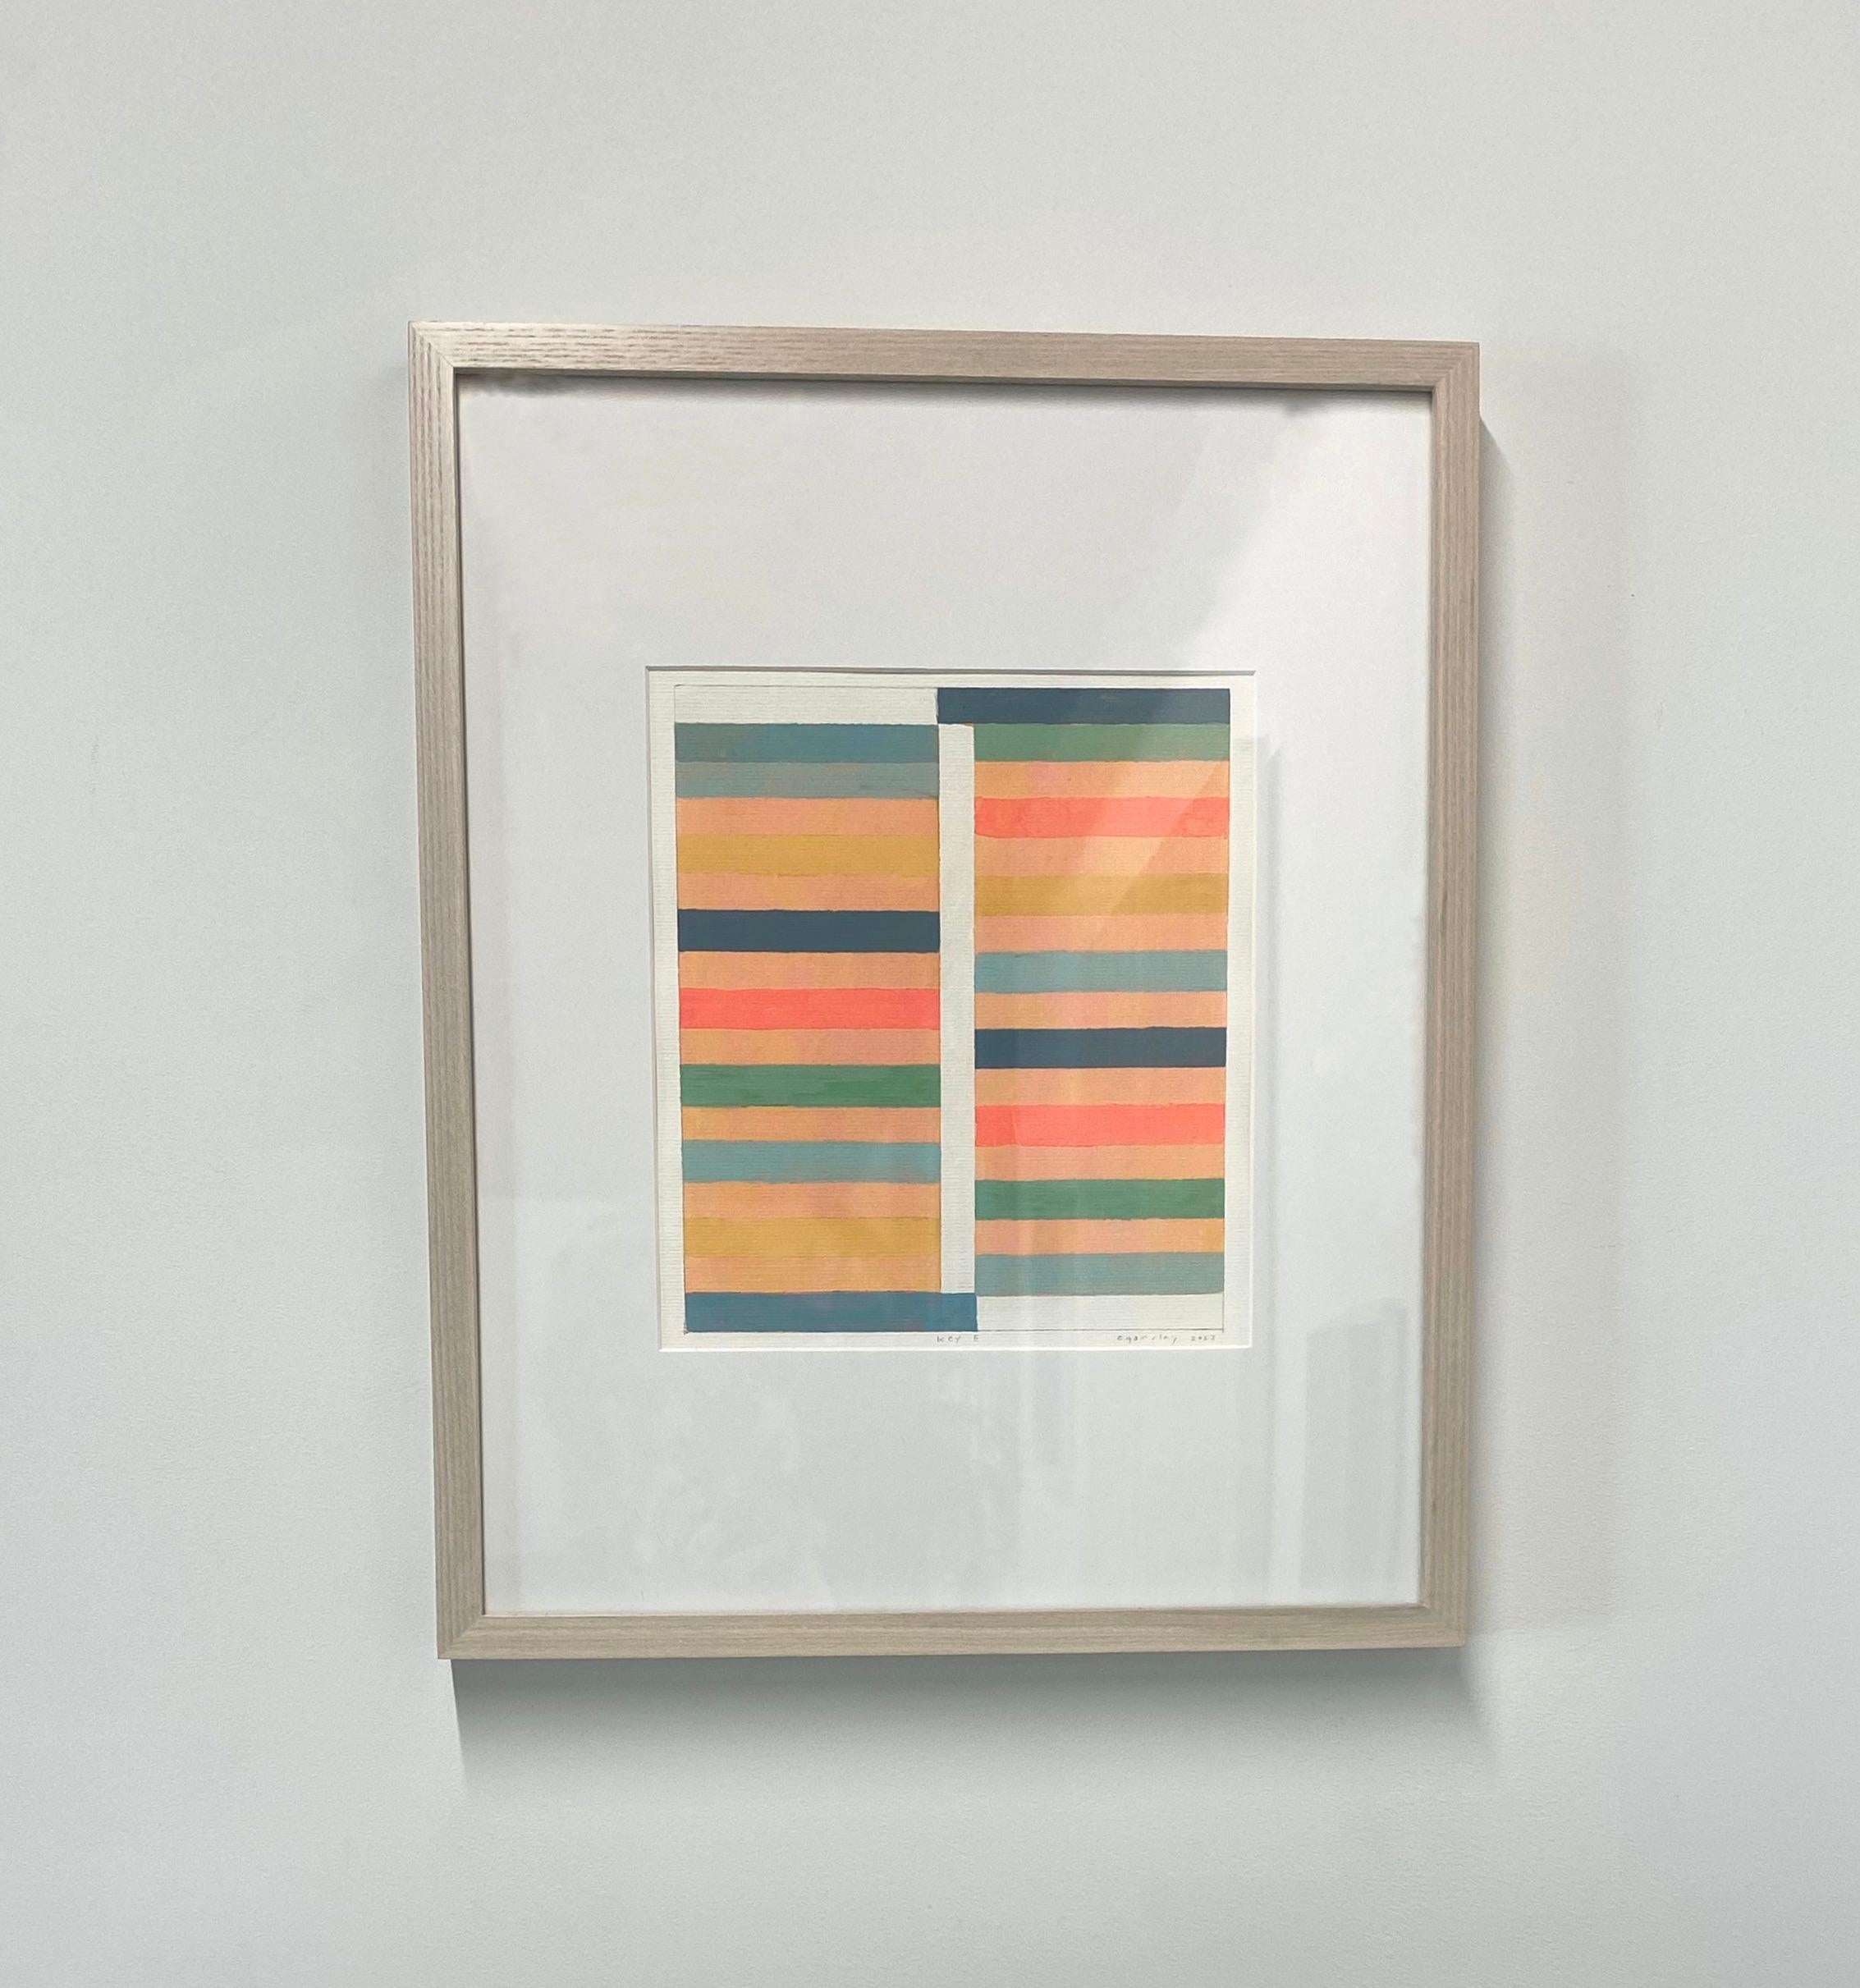 Key E, Modern Abstract Painting, Cream, Salmon Coral, Peach, Teal, Sage Green 1